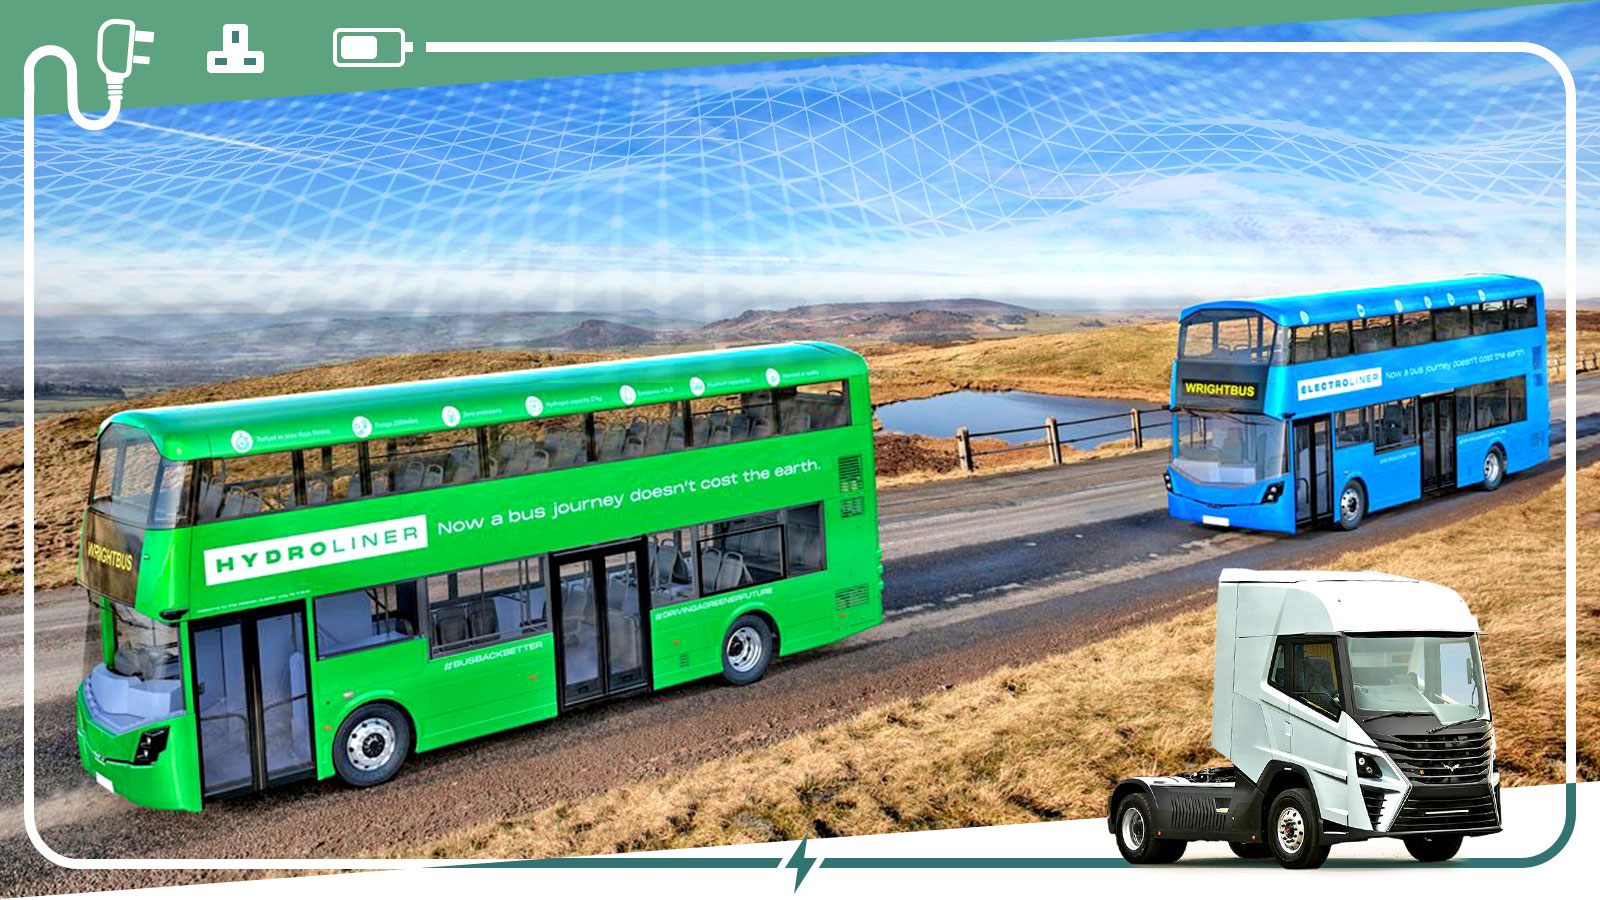 Wrightbus is leading the way with its hydrogen-powered buses